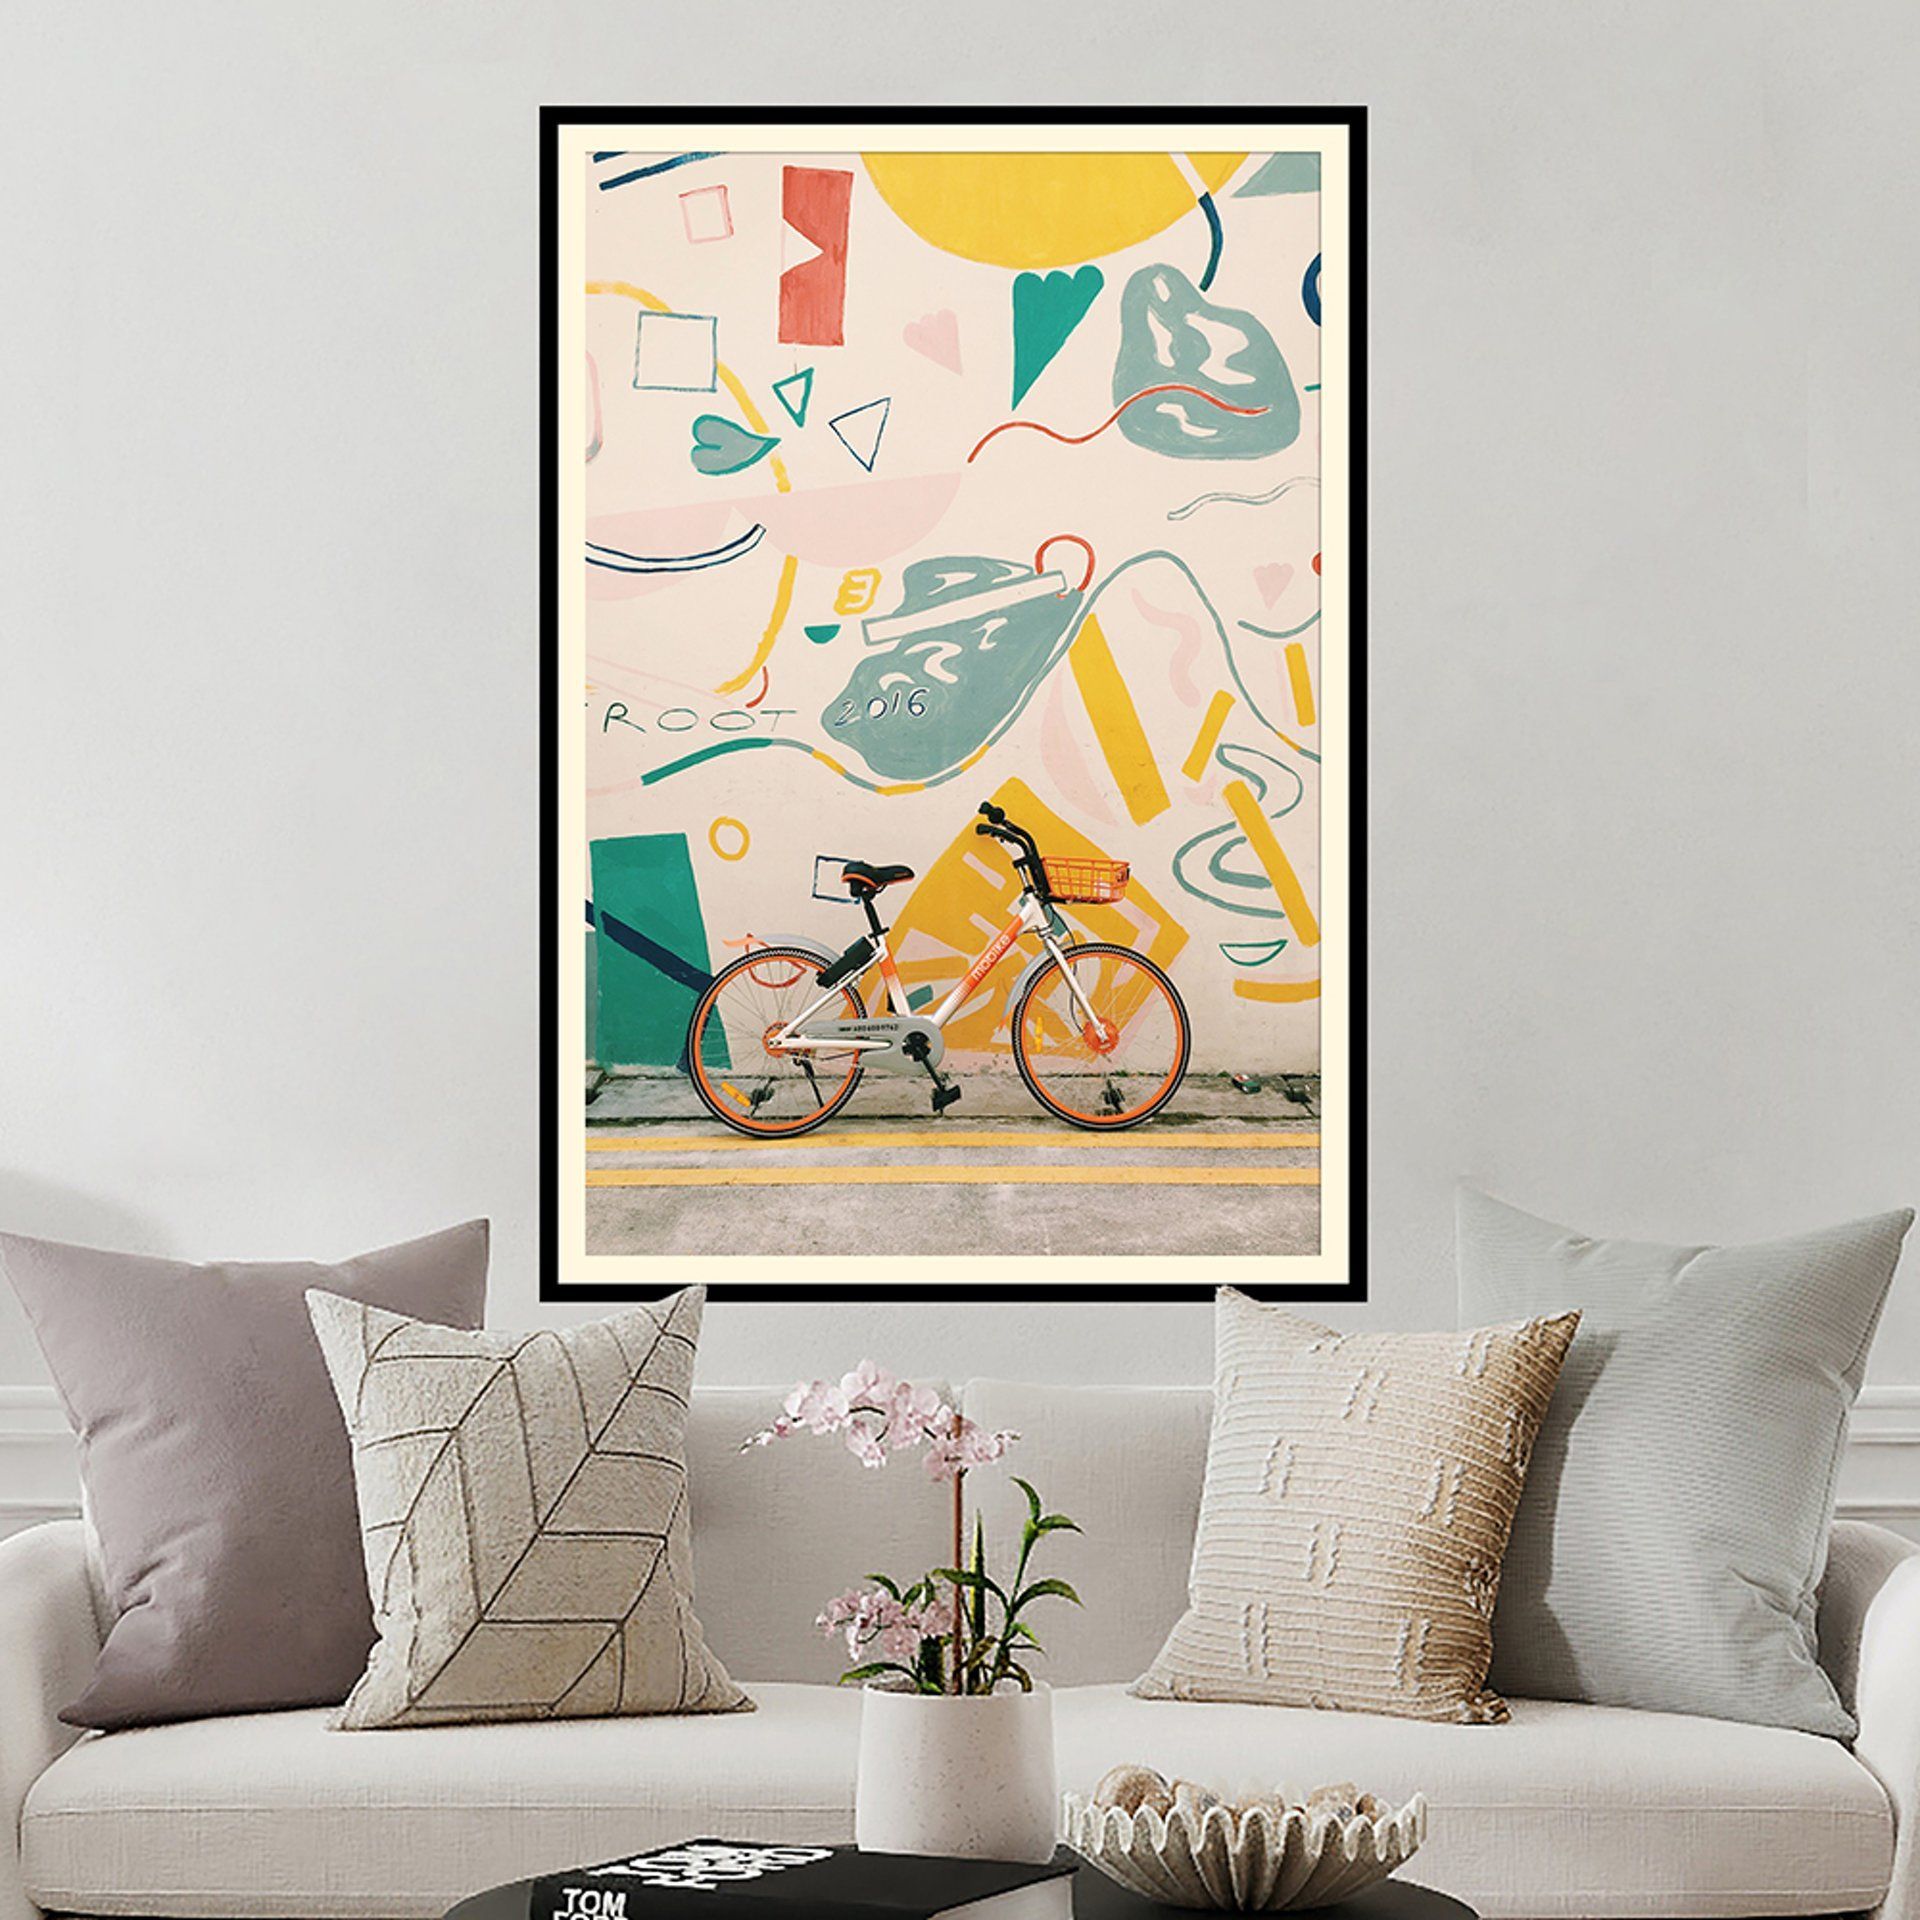 A painting of a bicycle is hanging on a wall above a couch